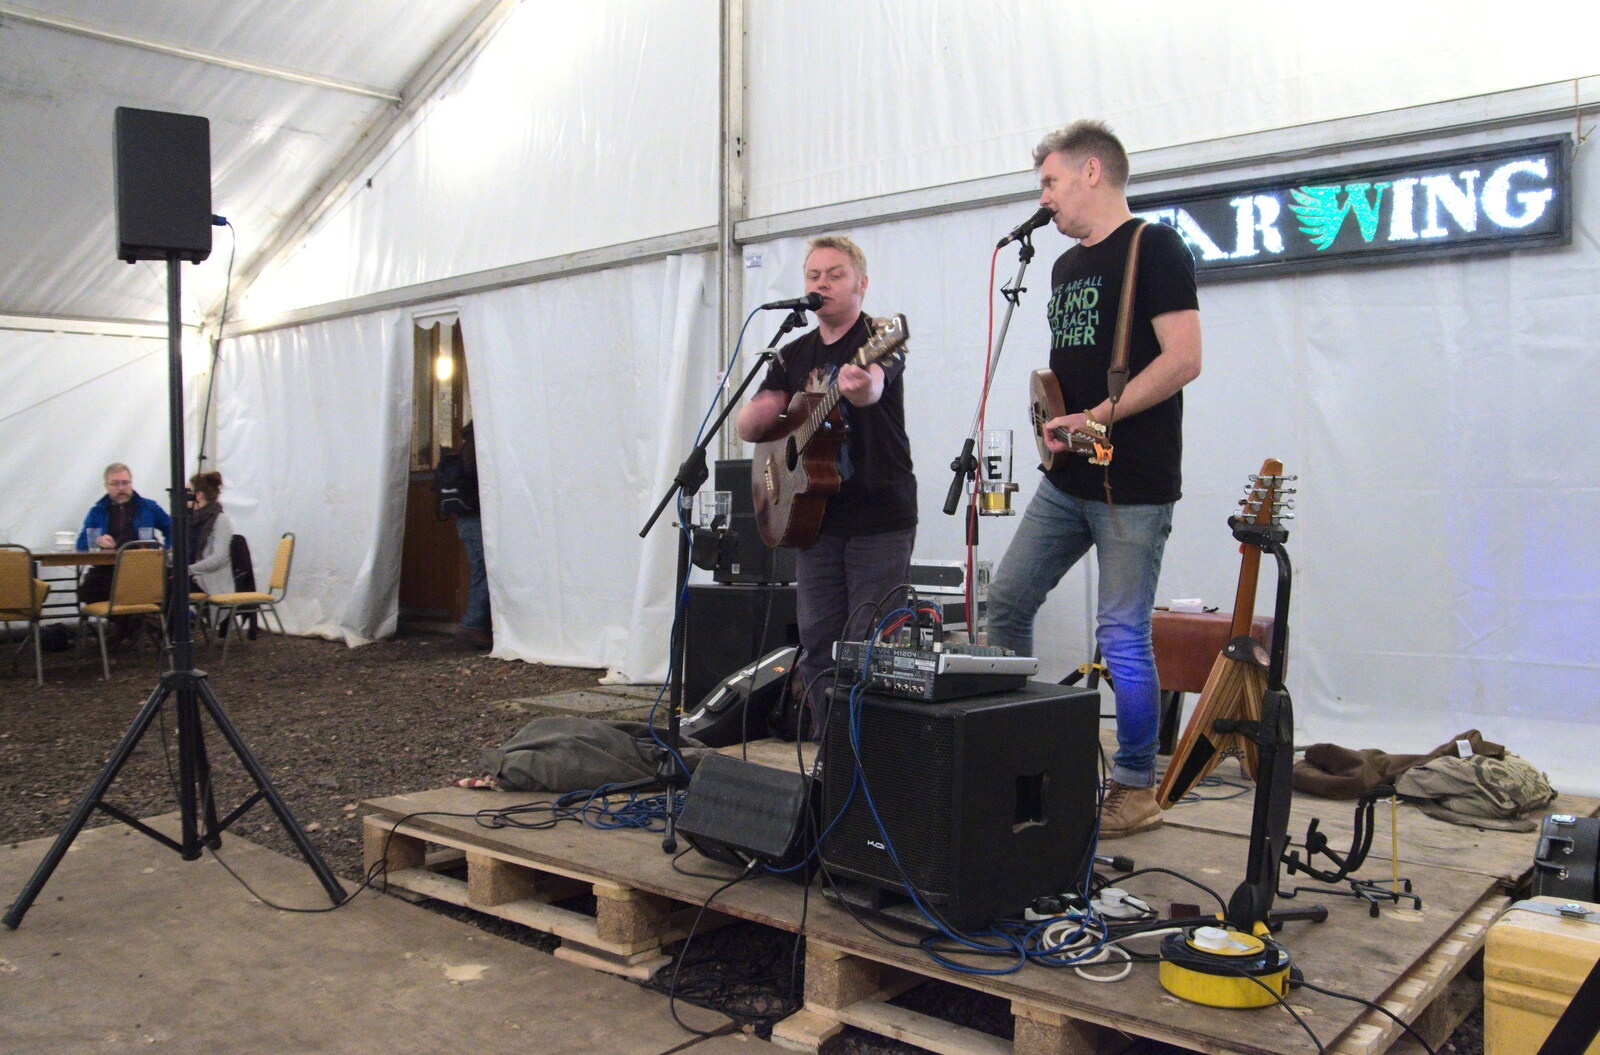 The Harvs do their thing from The Star Wing Winter Beer Fest, Redgrave, Suffolk - 31st January 2020